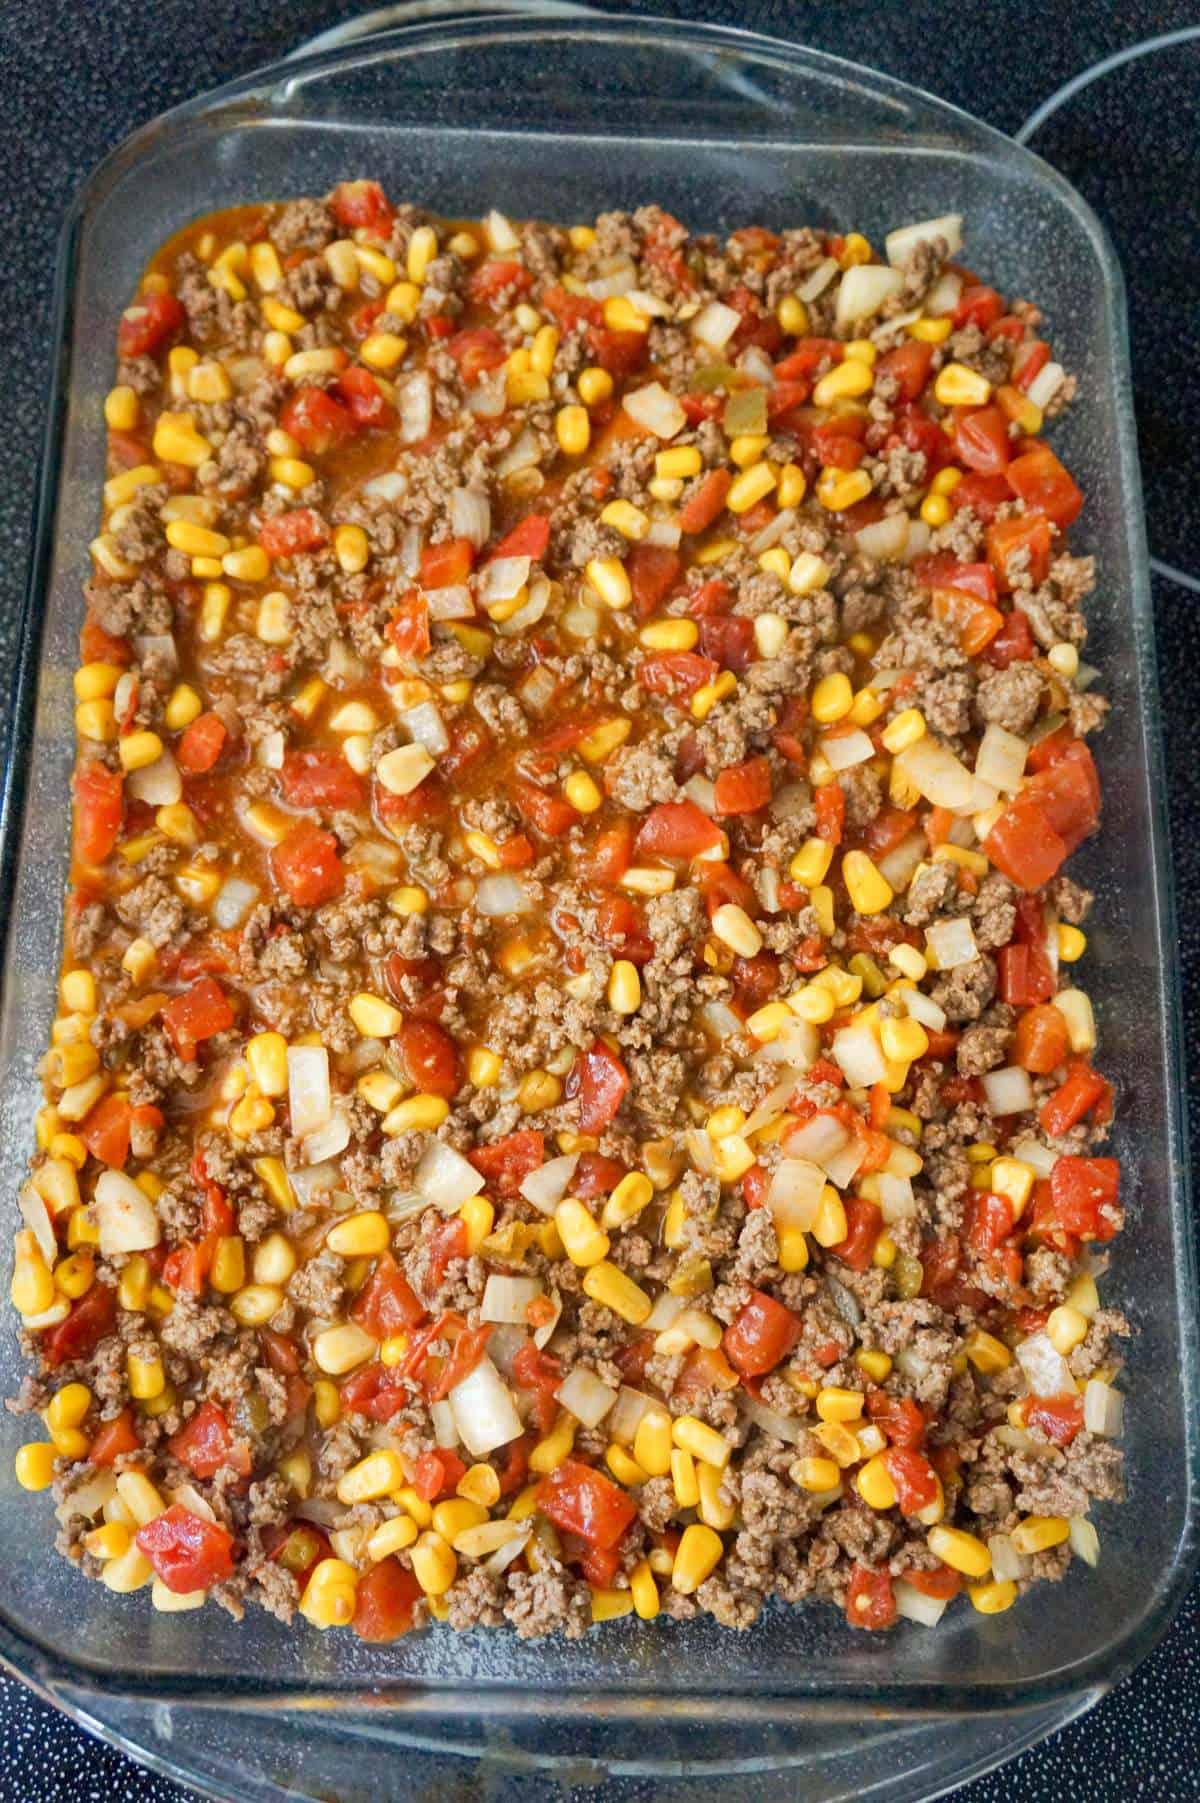 ground beef, corn and diced tomato mixture in a baking dish